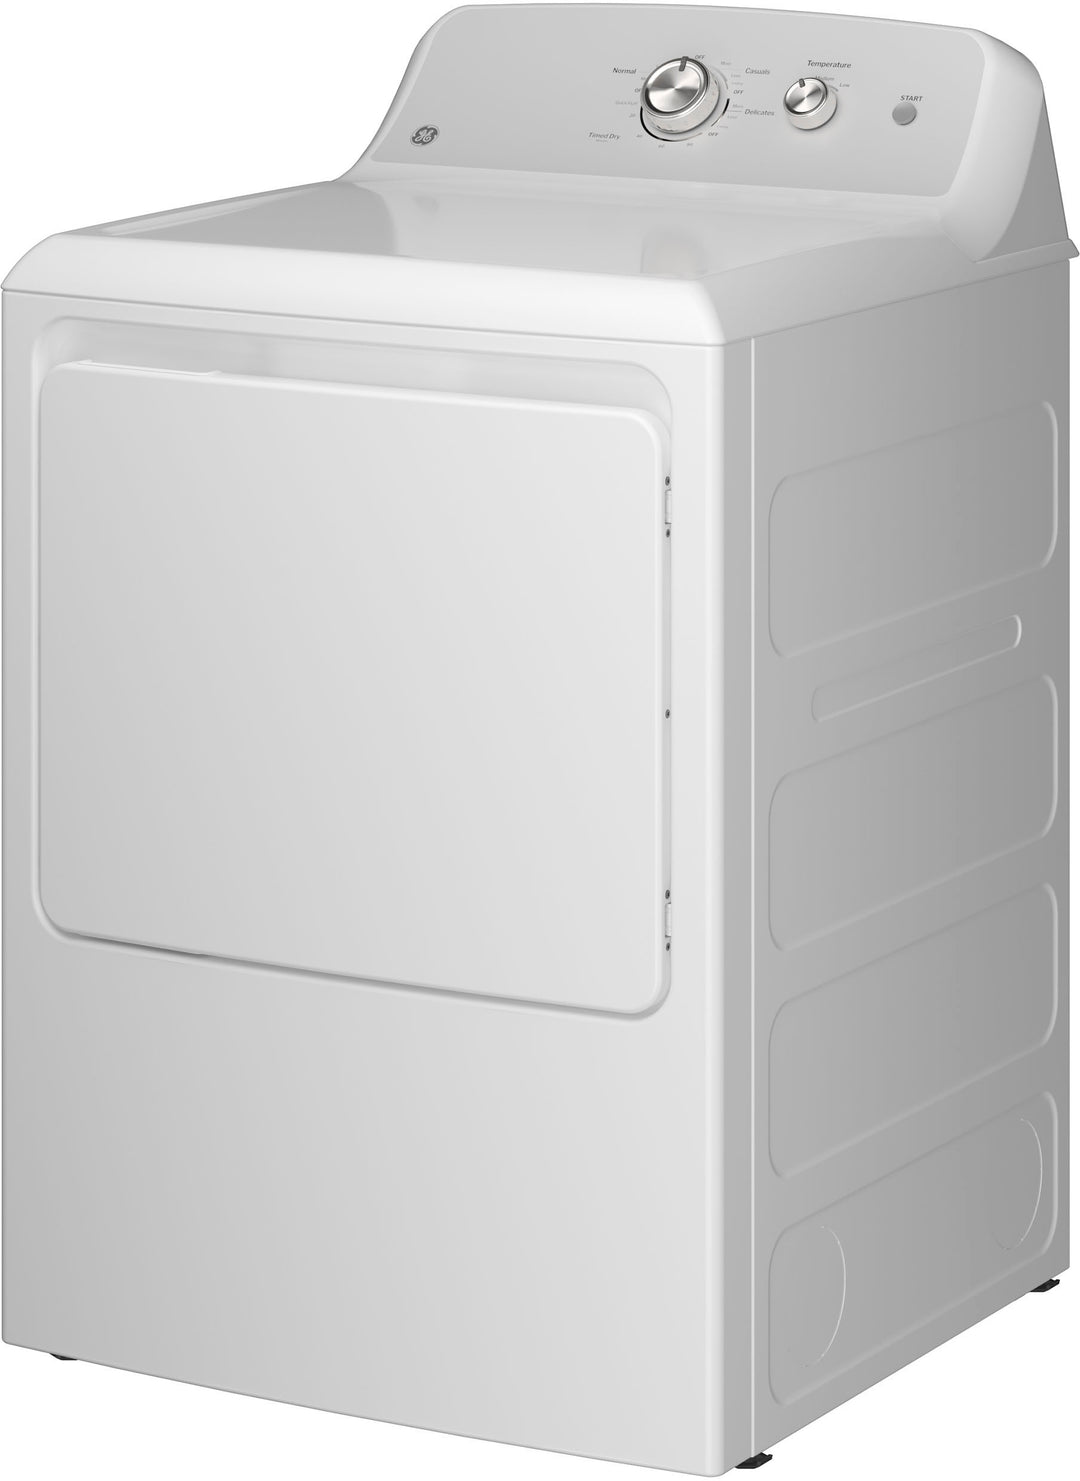 GE - 7.2 Cu. Ft. Electric Dryer with Long Venting up to 120 Ft. - White with Silver Matte_10